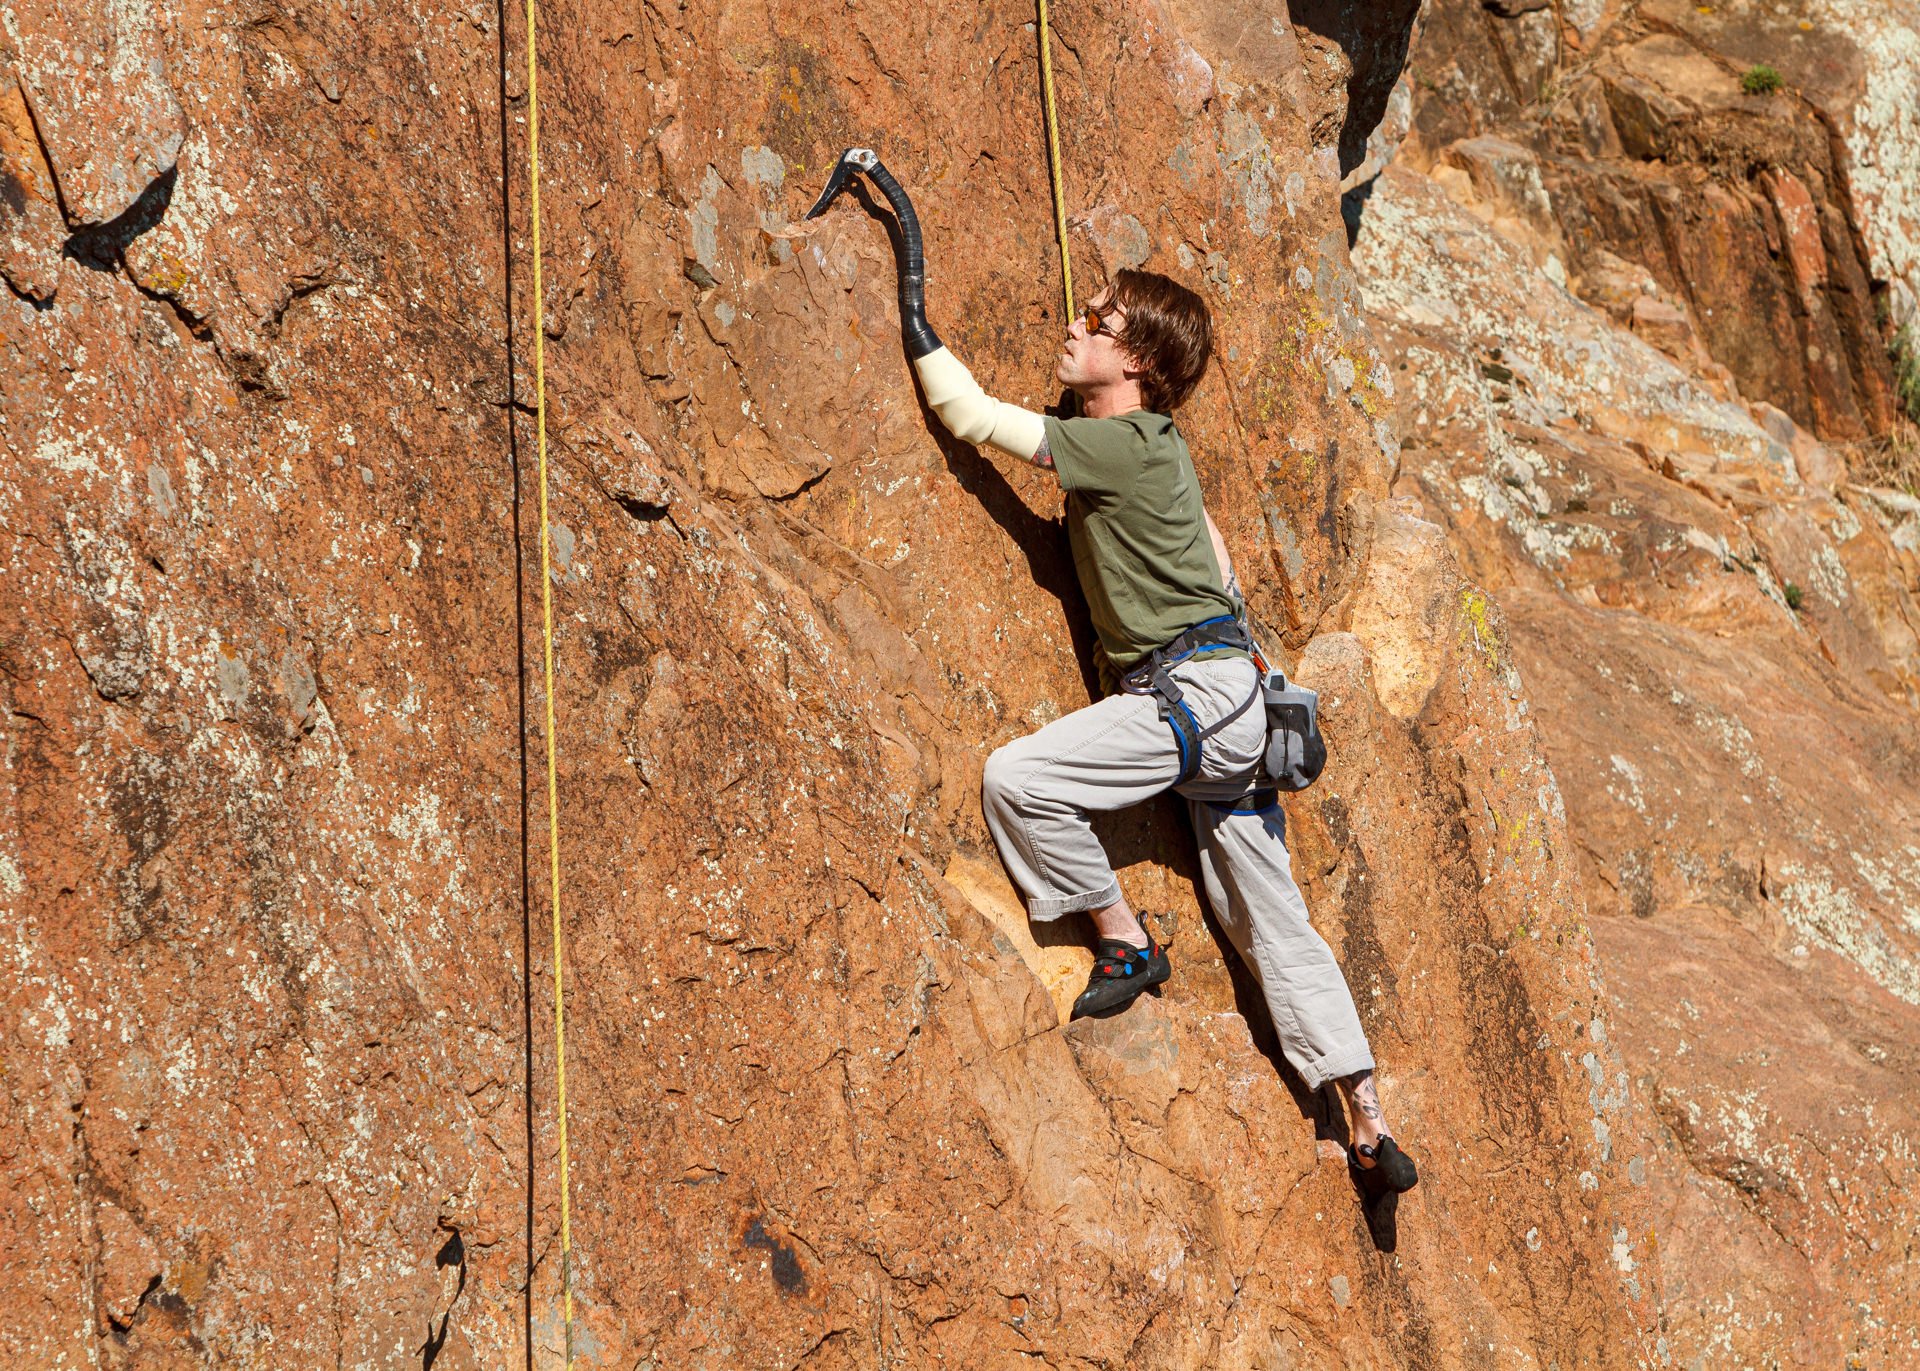 Bryan Doyne uses his activity-specific prosthesis to rock climb in the Wichita Mountains.